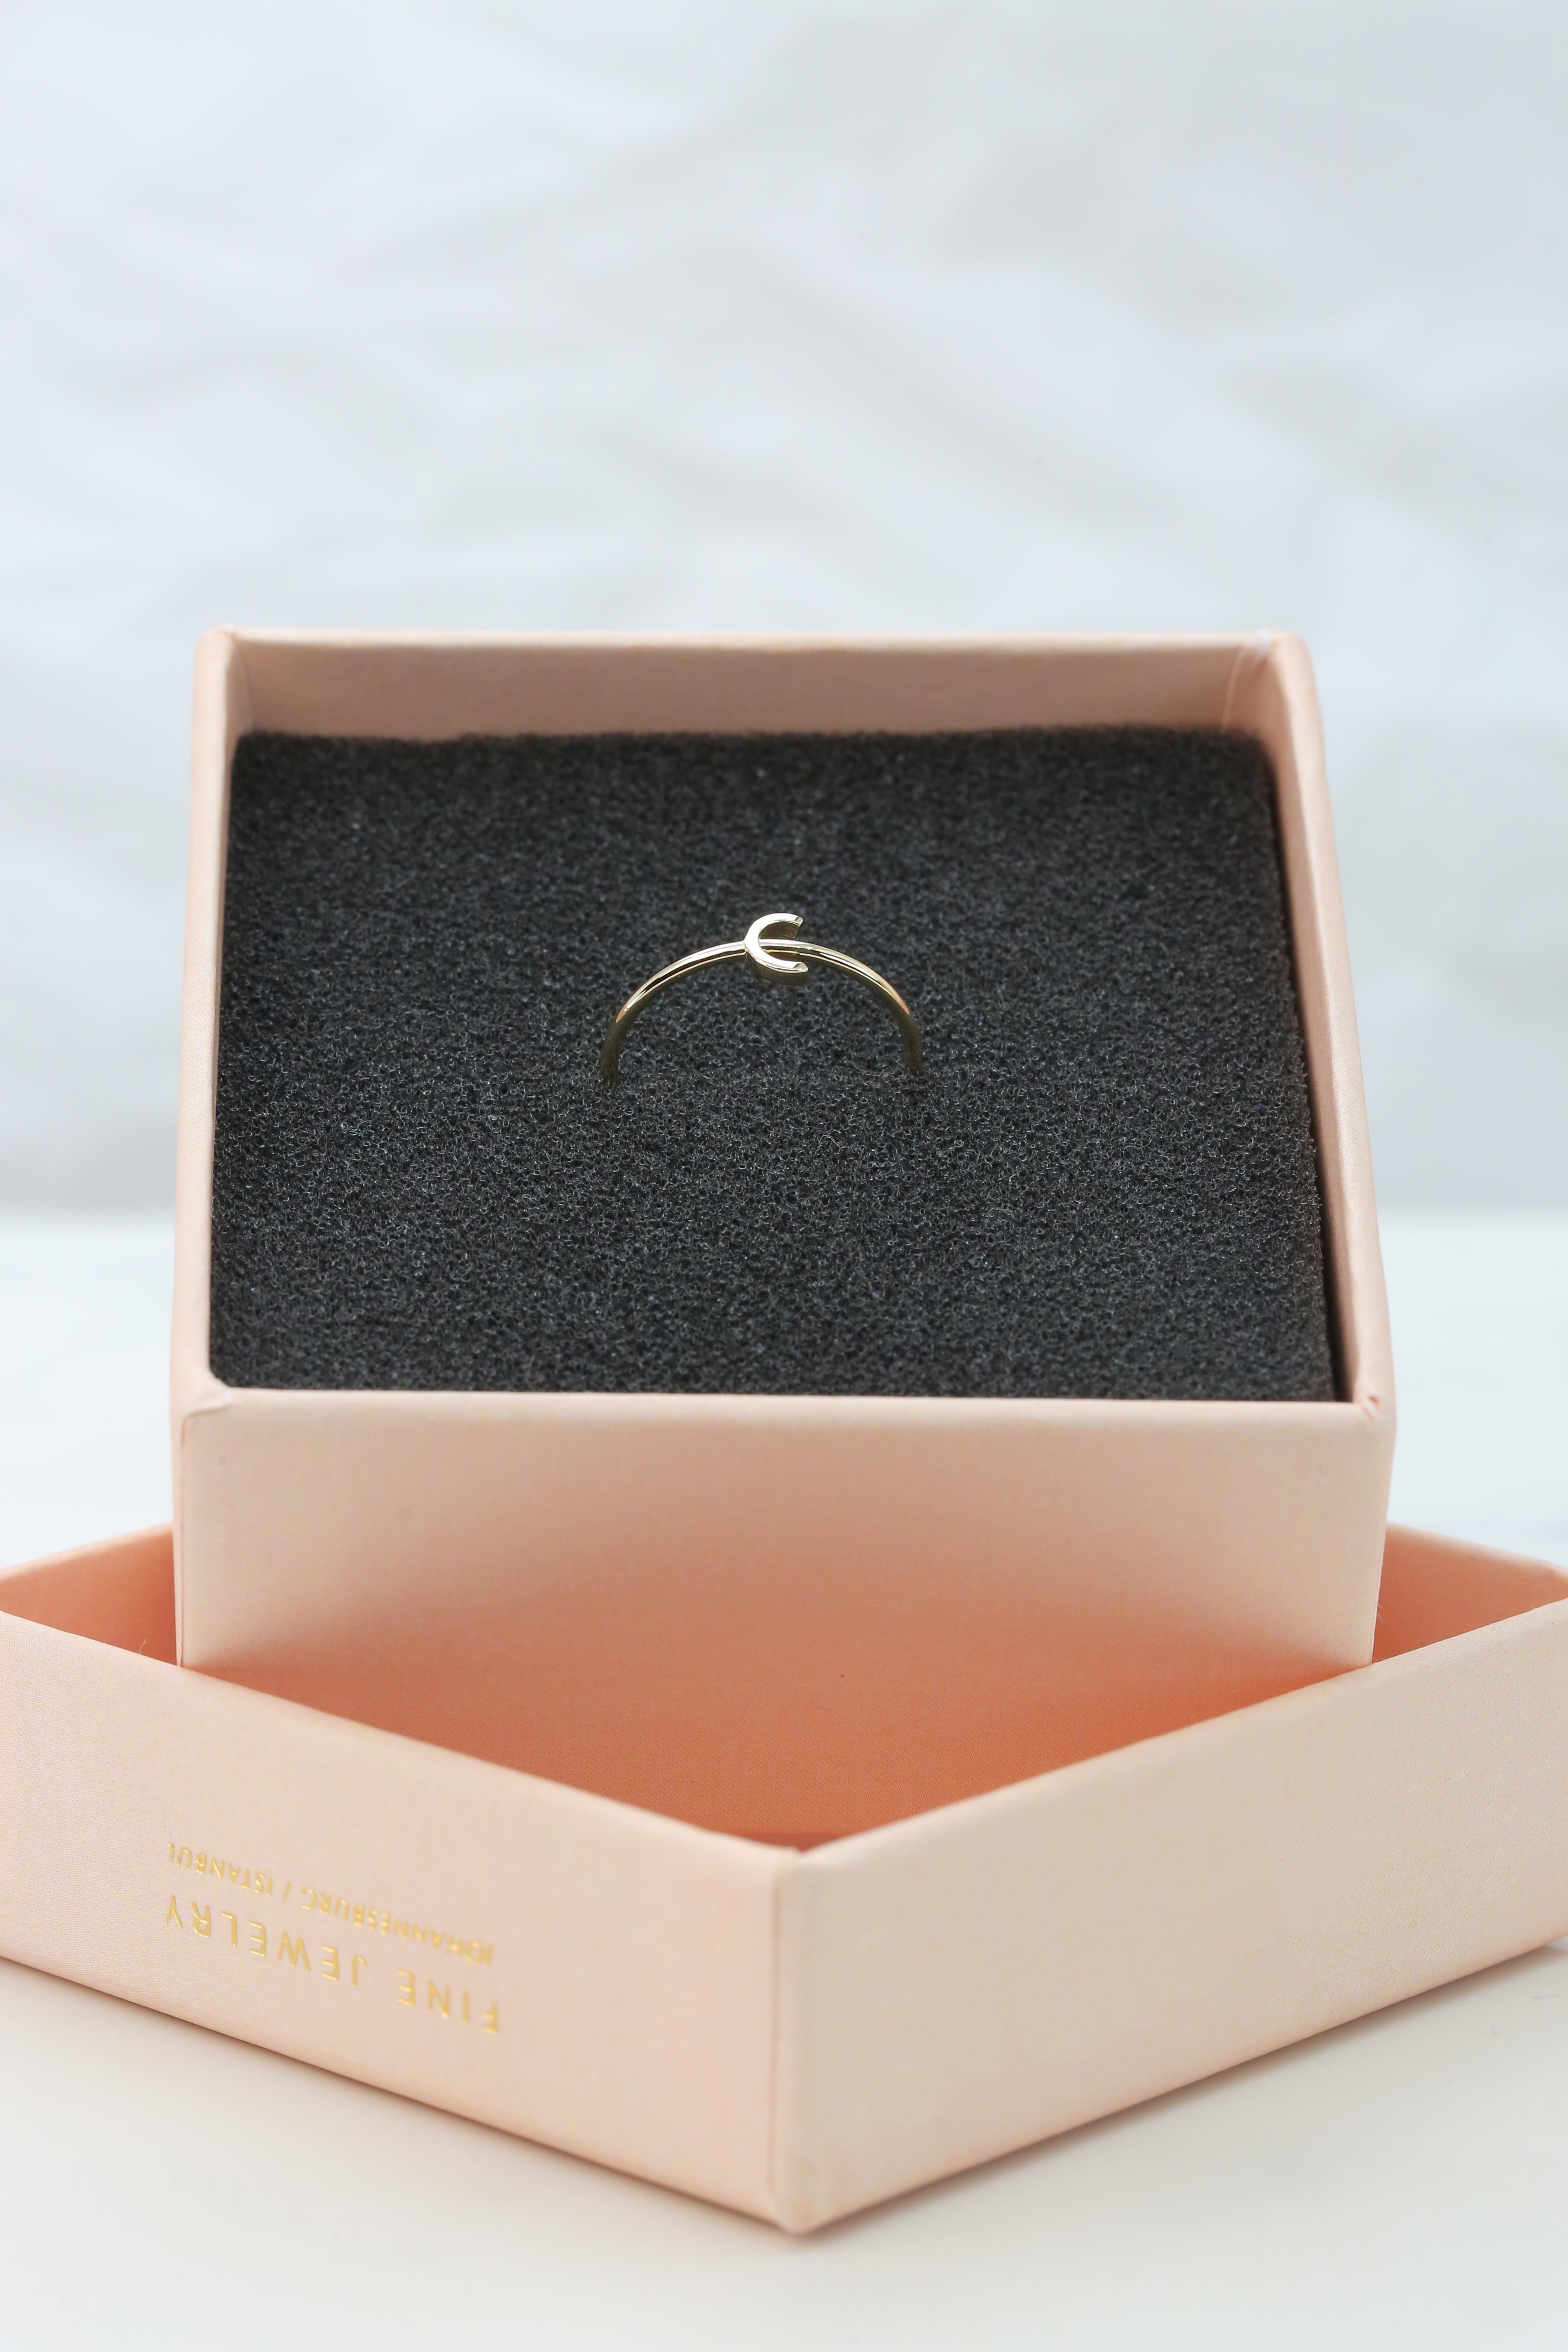 For Sale:  14K Gold Initial C Letter Ring, Personalized Initial Letter Ring 3